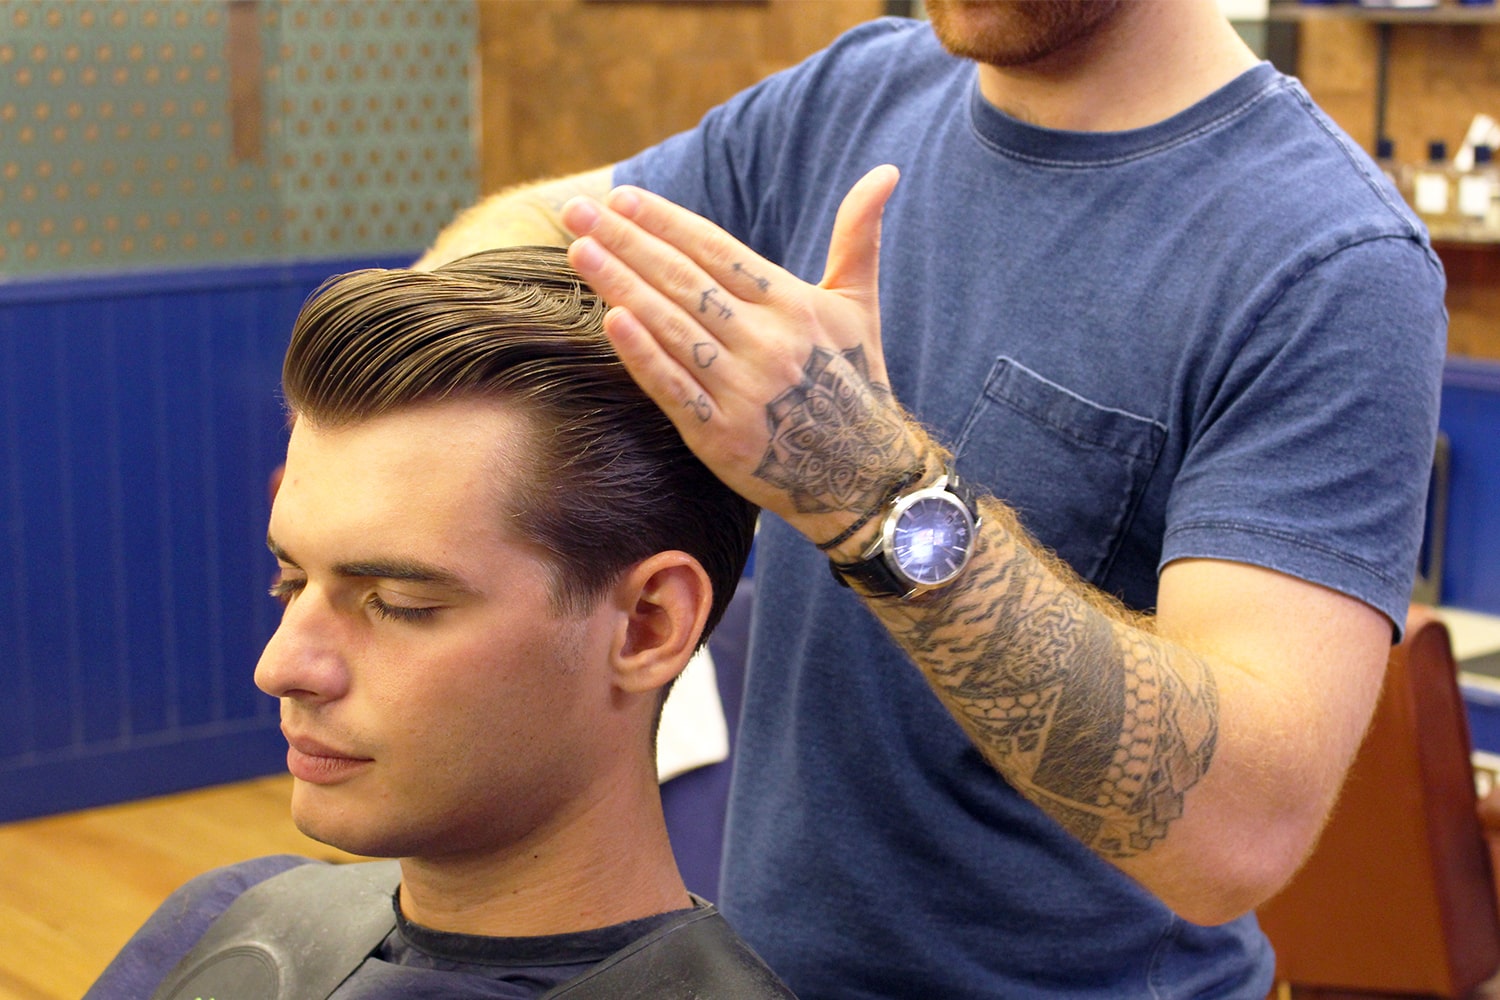 50 Cool Shaved Sides Hairstyles for Men to Get You Inspired